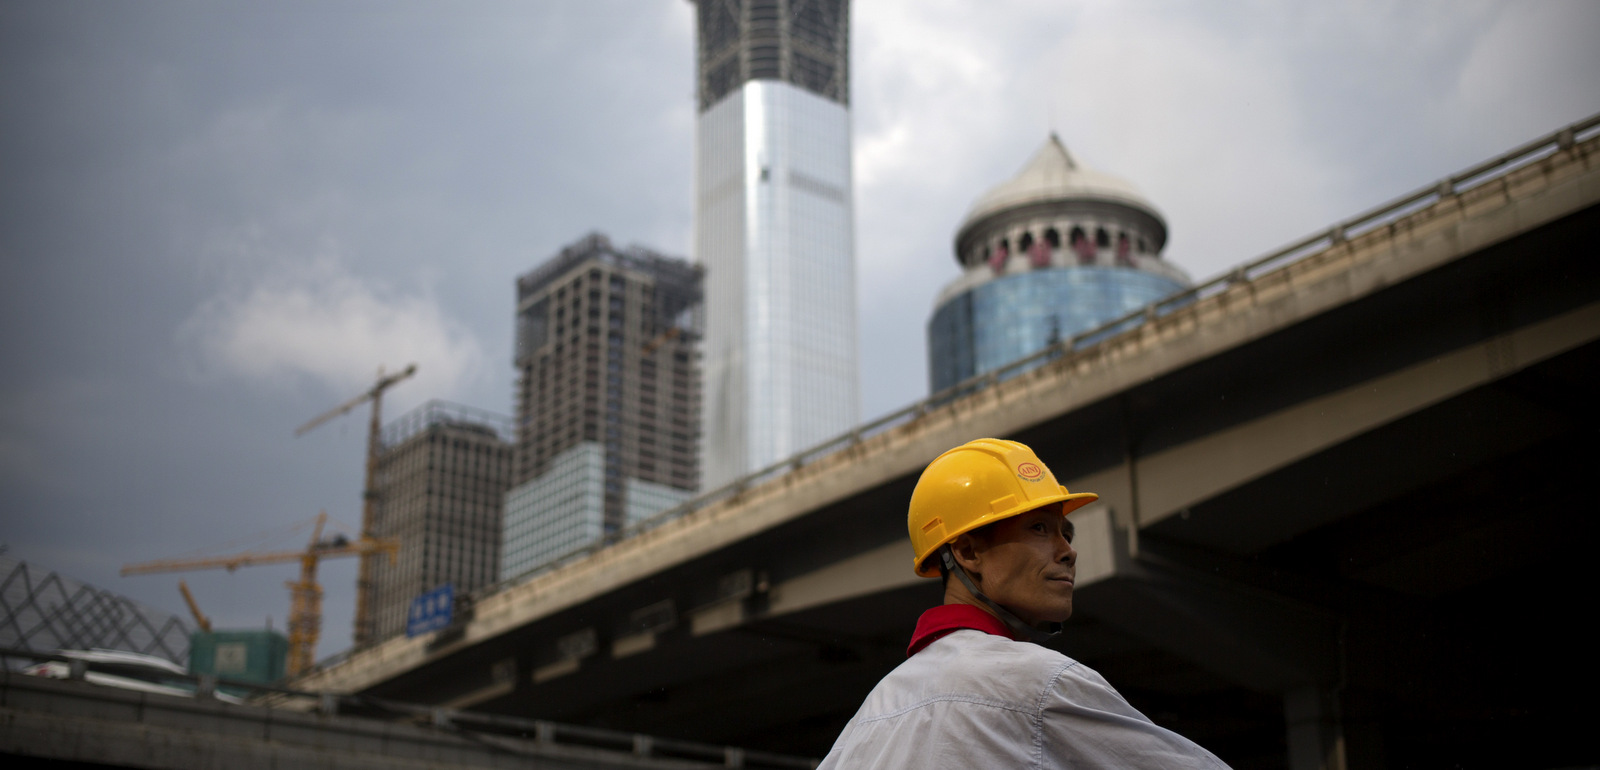 A construction worker waits to cross an intersection near buildings under construction in the central business district of Beijing, Aug. 16, 2017.  (AP/Mark Schiefelbein)